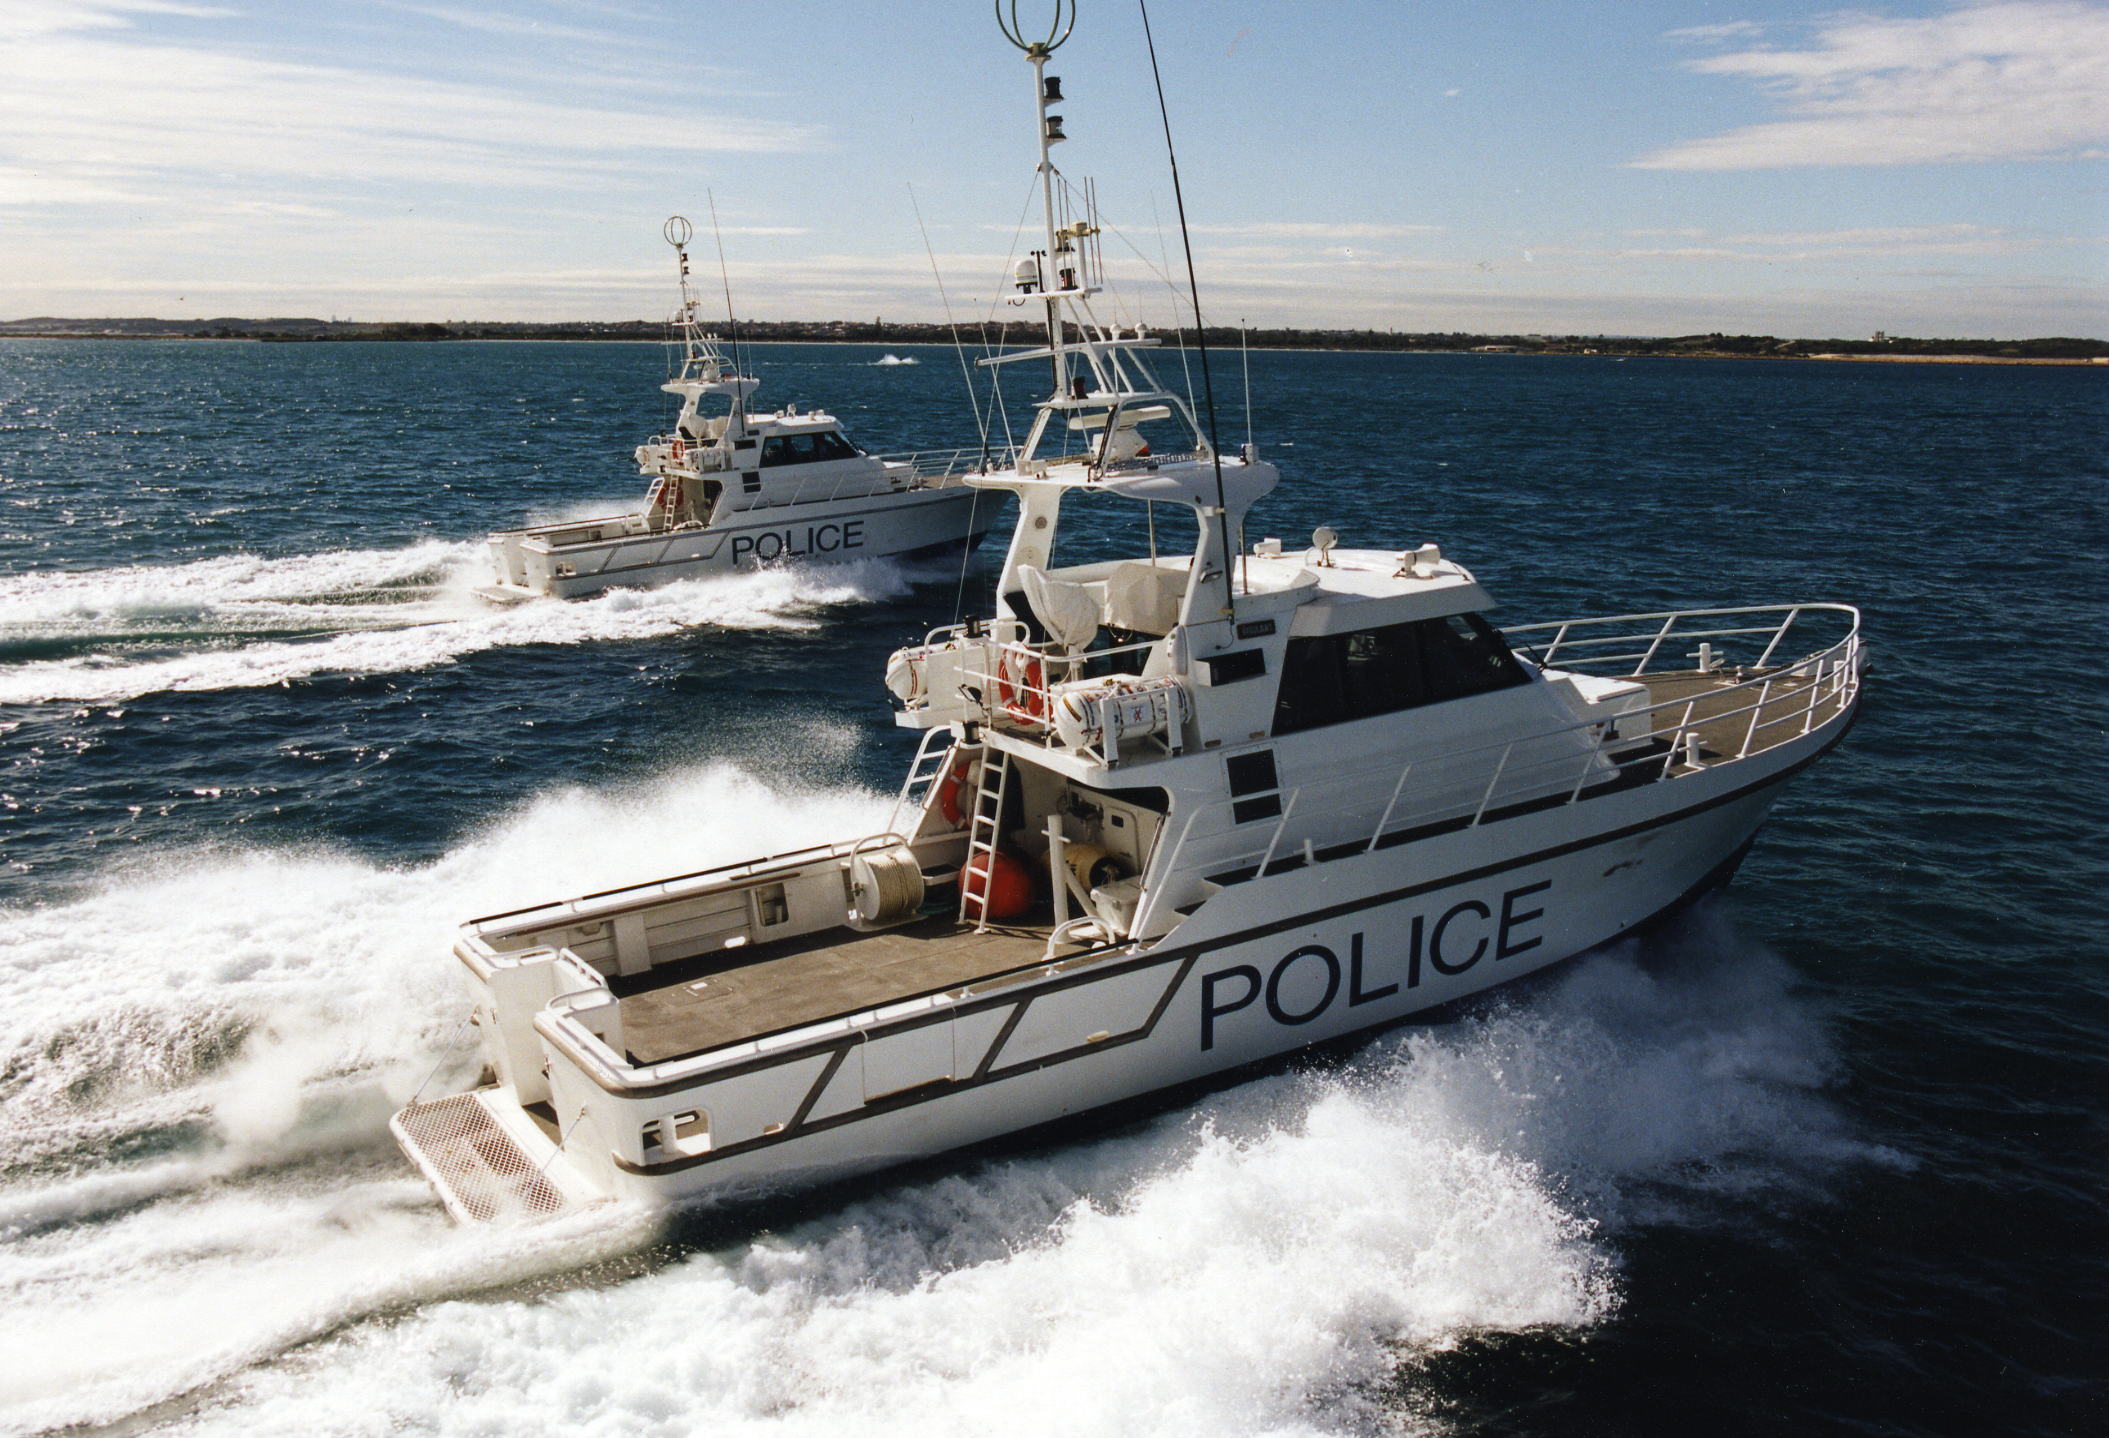 Nsw Water Police Backgrounds, Compatible - PC, Mobile, Gadgets| 2109x1438 px